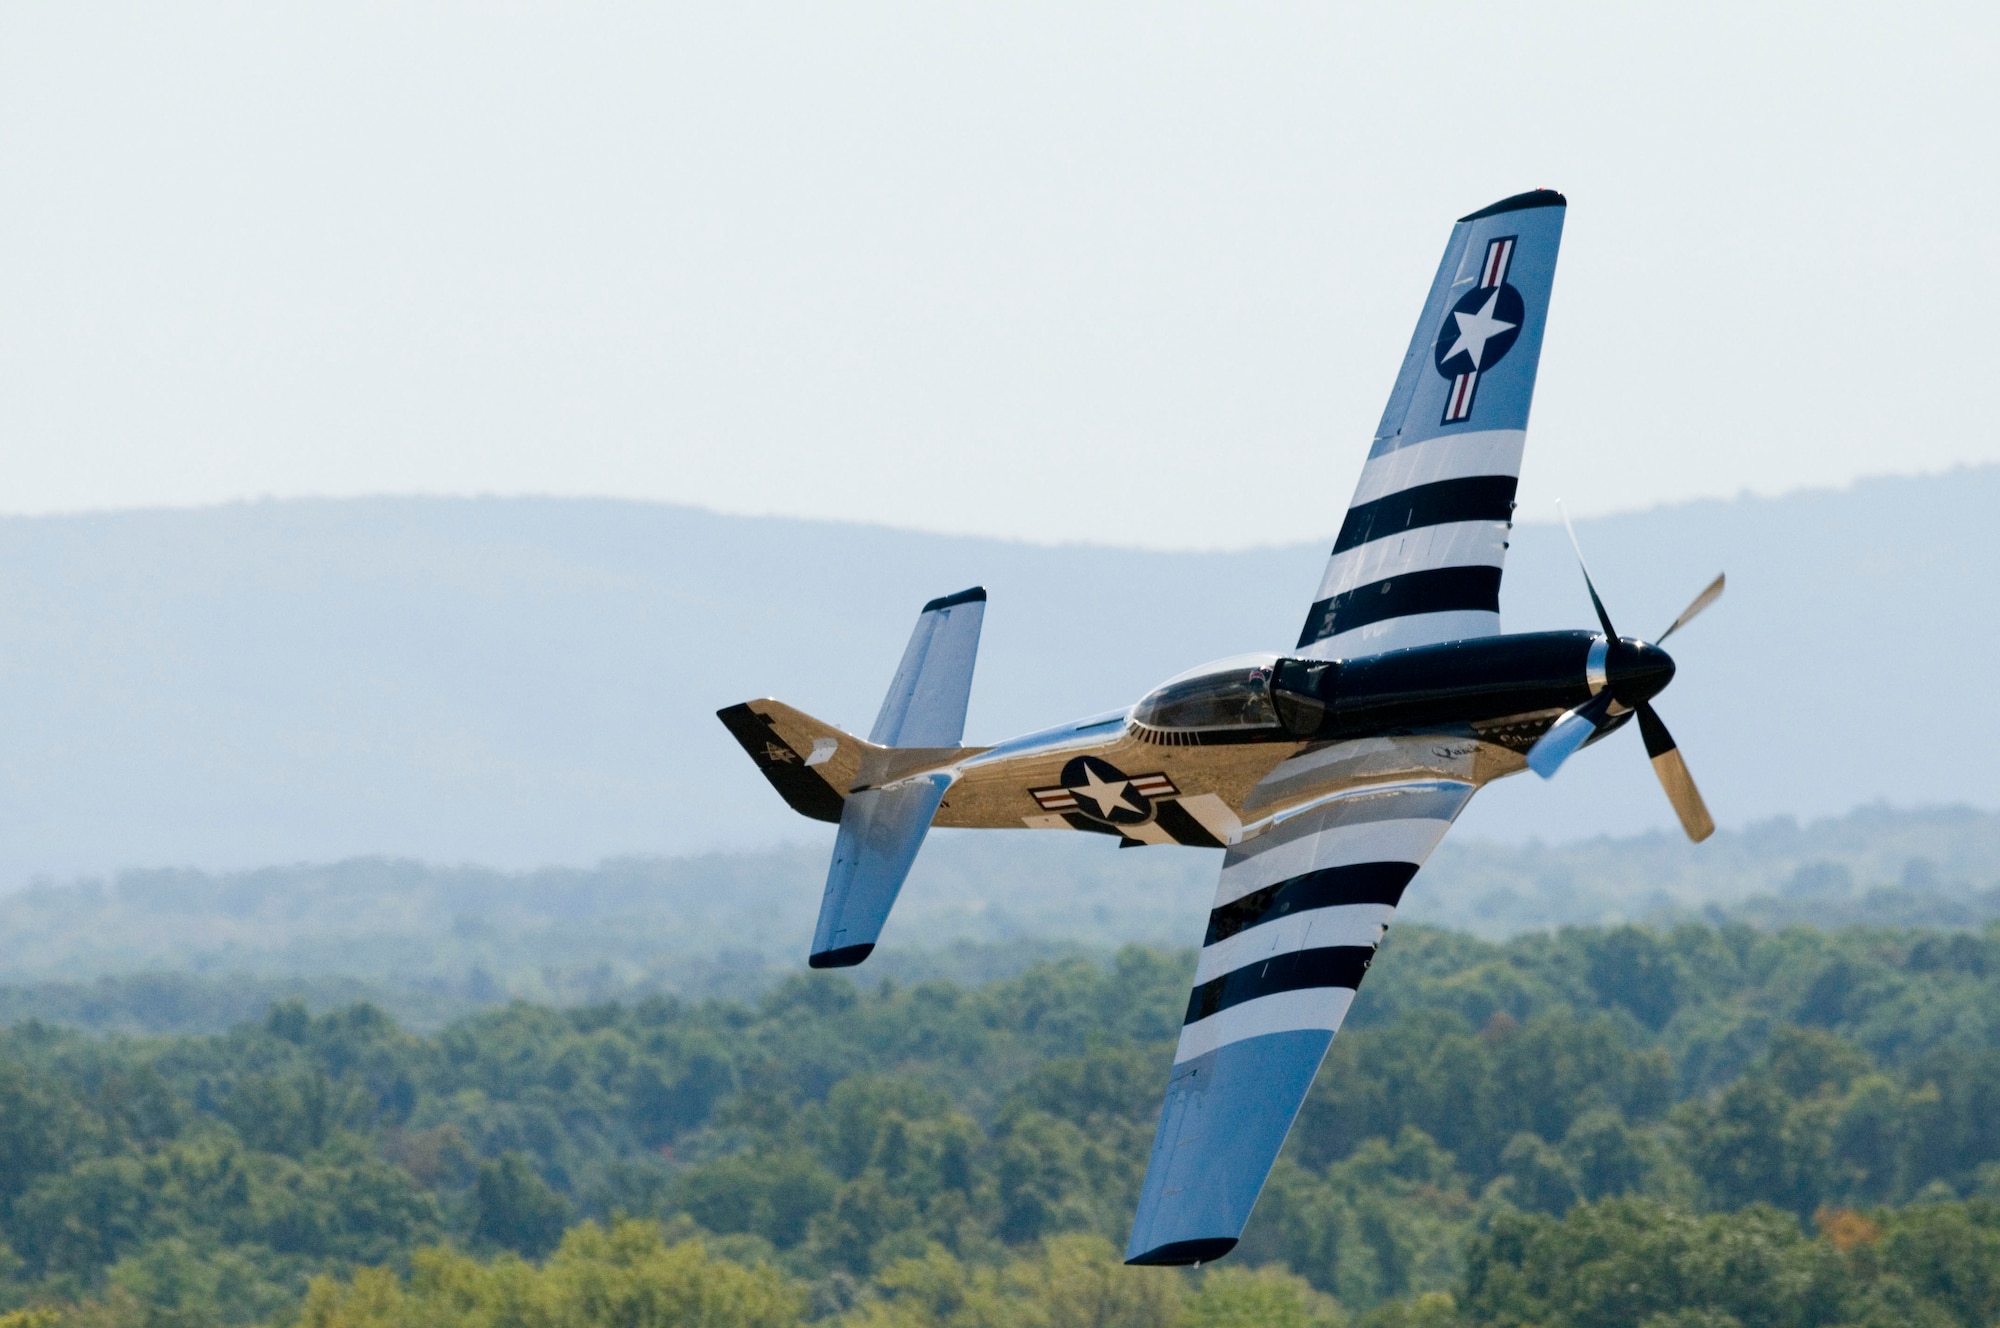 A P-51 Mustang named Quicksilver, piloted by Scott Yoak of Lewisburg, WV performs during the Thunder Over the Blue Ridge Open House and Air Show. The 167th Airlift Wing, West Virginia Air National Guard unit in Martinsburg, WV held an open house in conjuction with the Thunder Over the Blue Ridge Air Show on September 4 and 5, 2010. The U.S. Air Force Thunderbirds and the U.S. Army Golden Knights headlined the show. (U.S. Air Force photo by MSgt Sean Brennan)